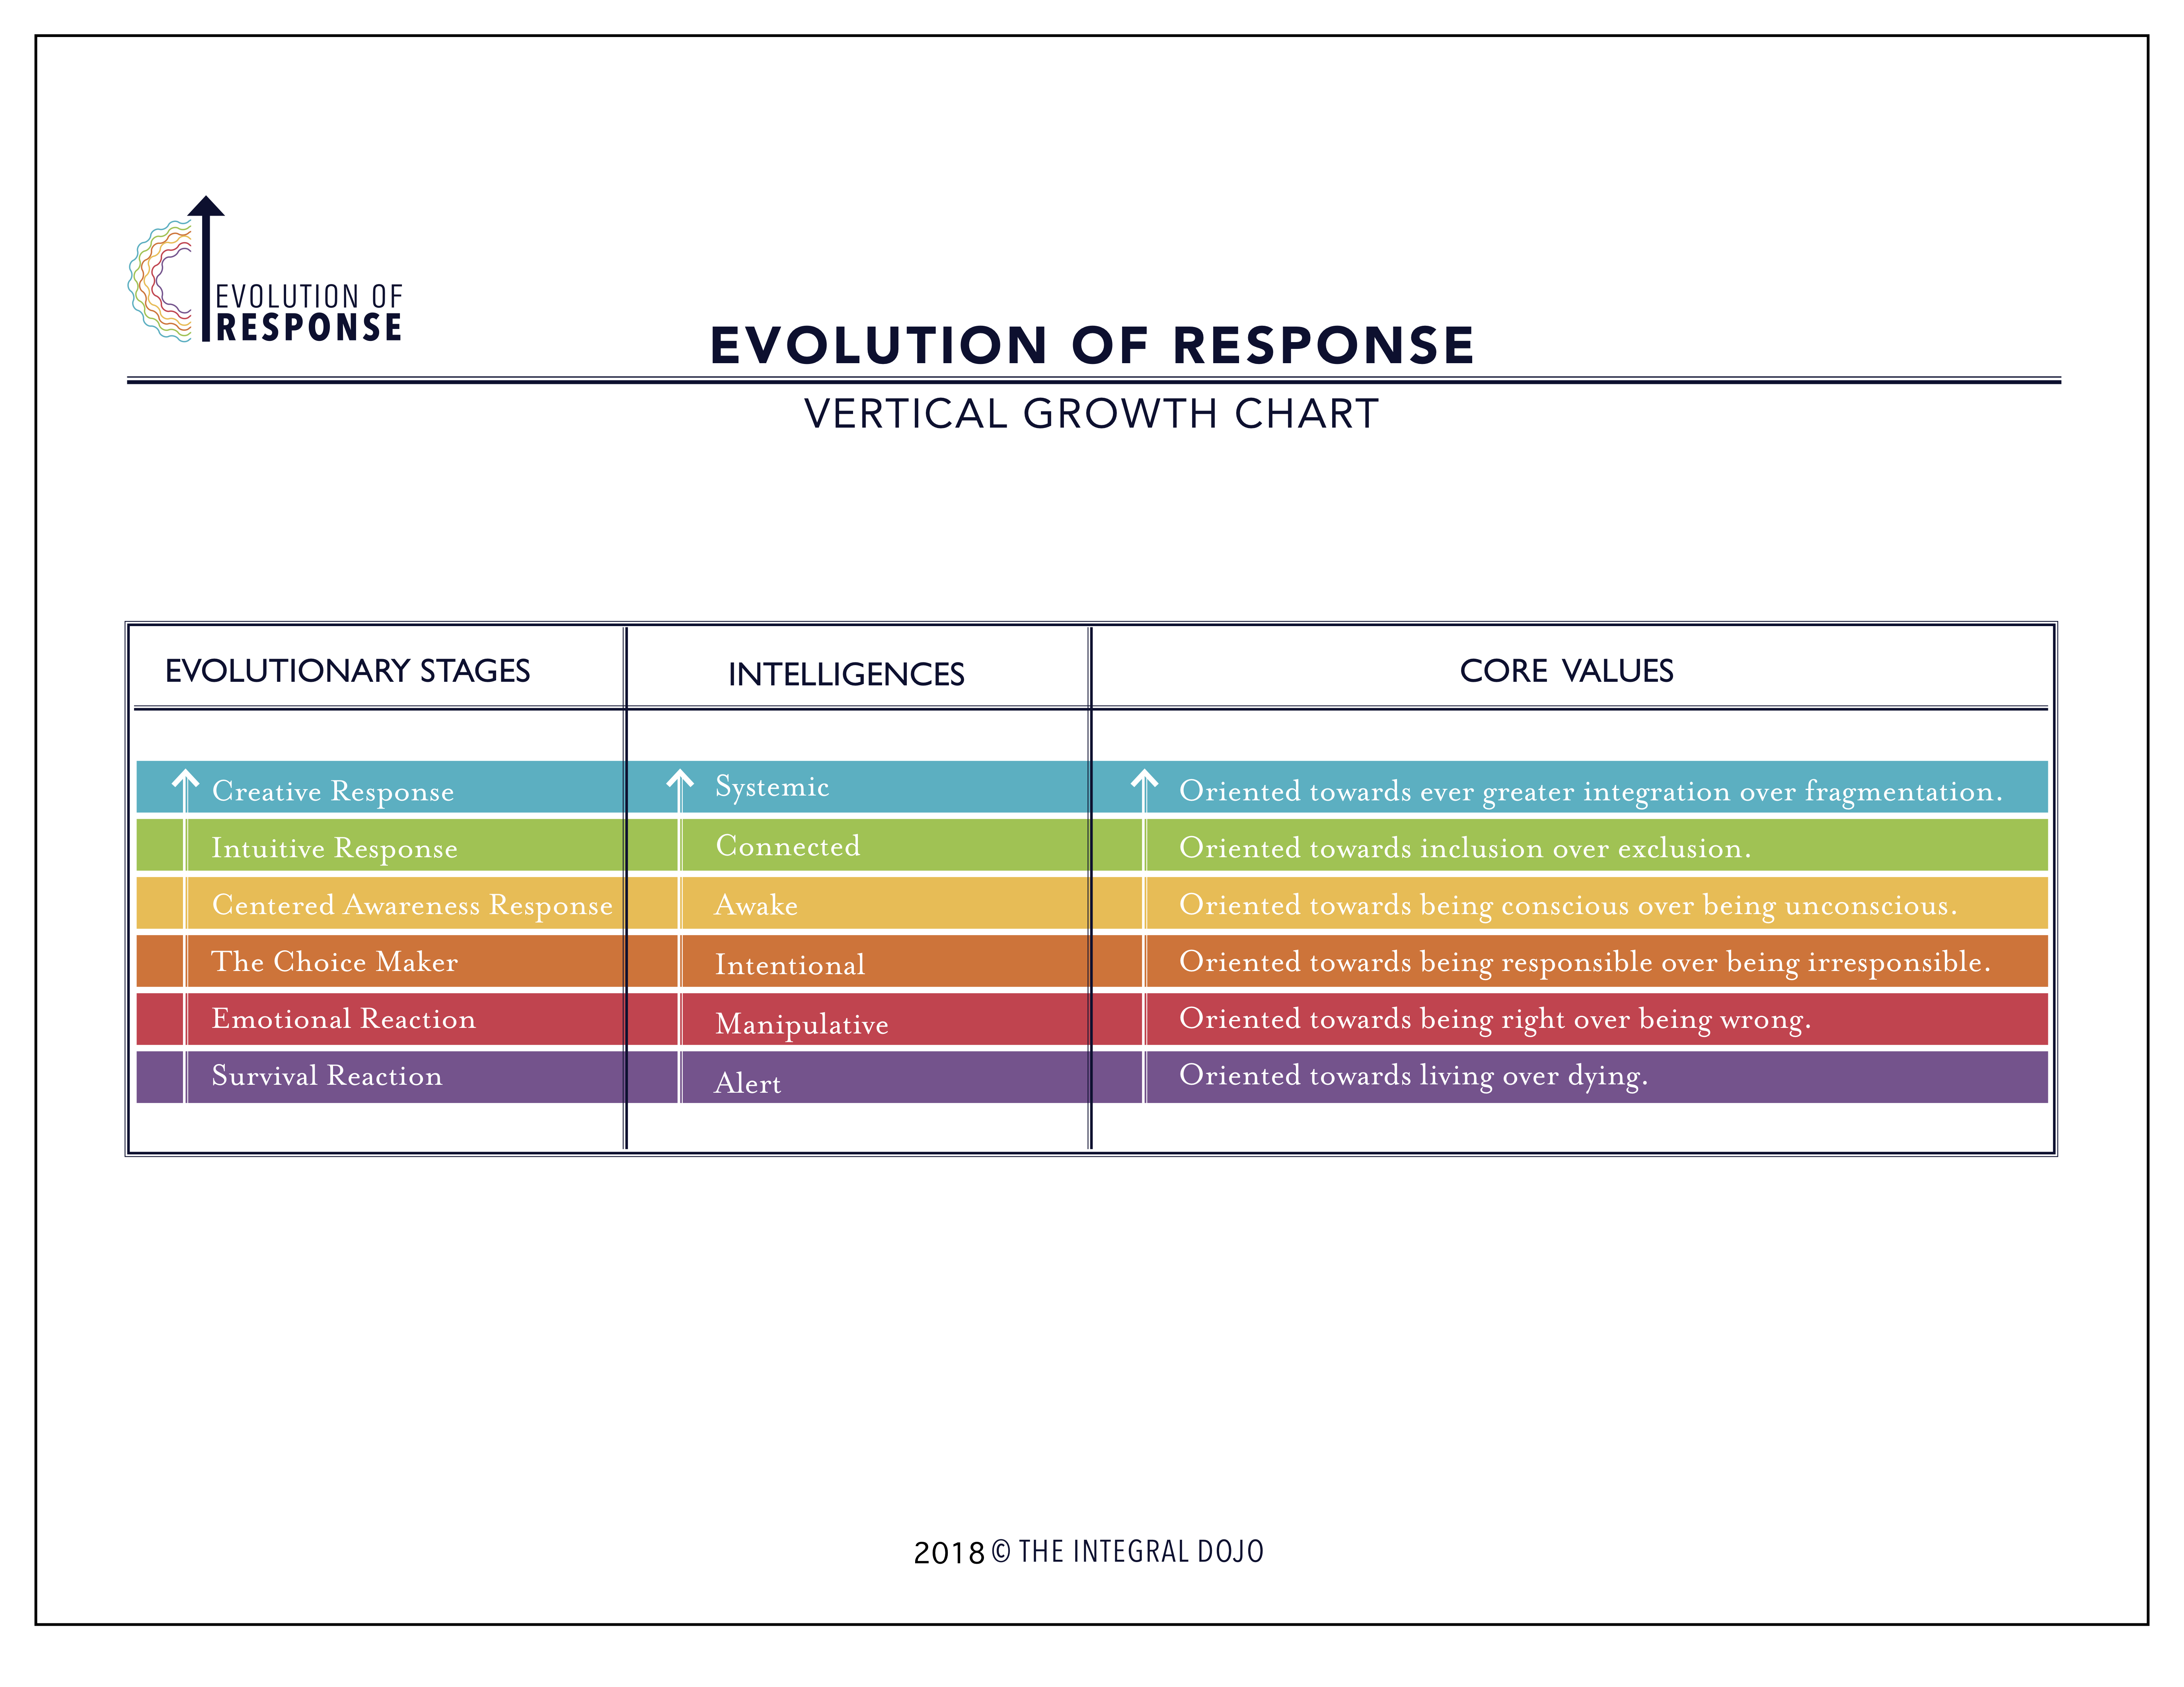 Evolution Of Response-Vertical Growth Chart